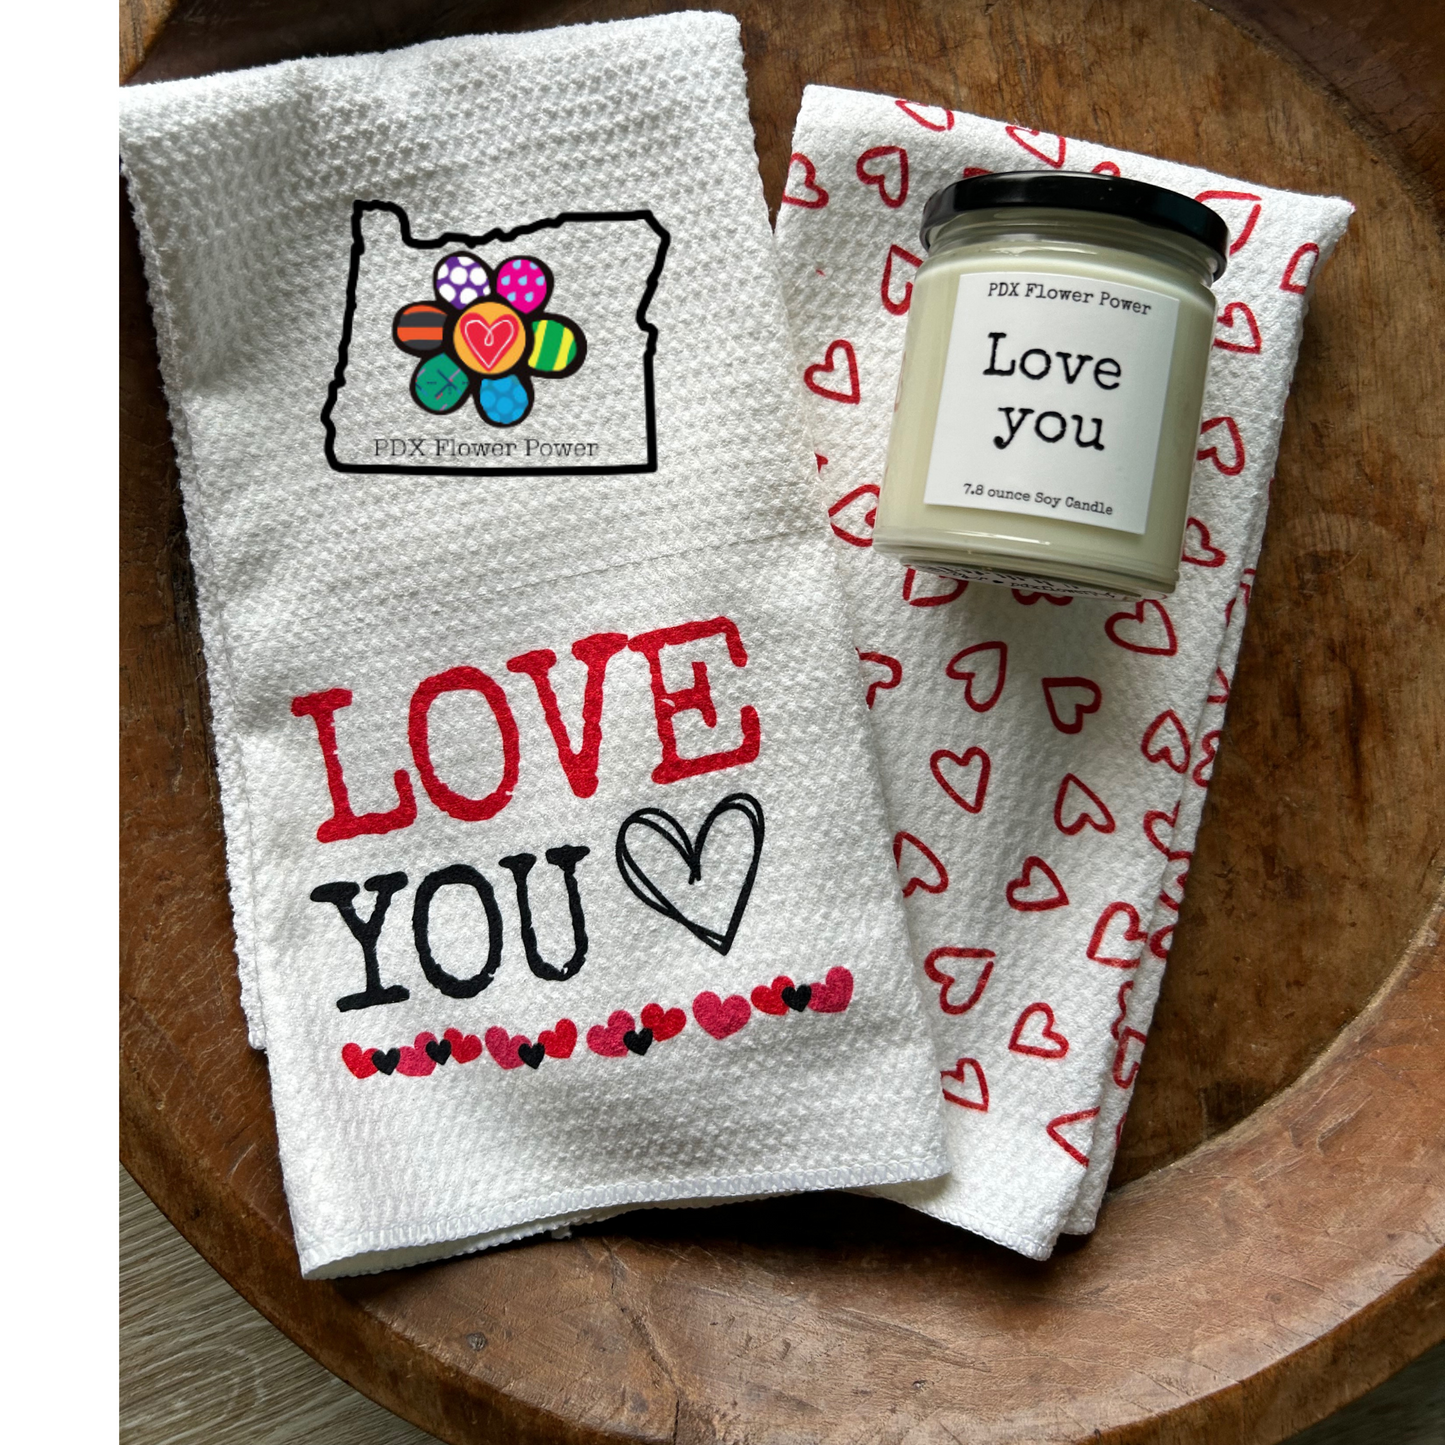 Love You candle and towel set, Happy Valentine's Day gift, heart